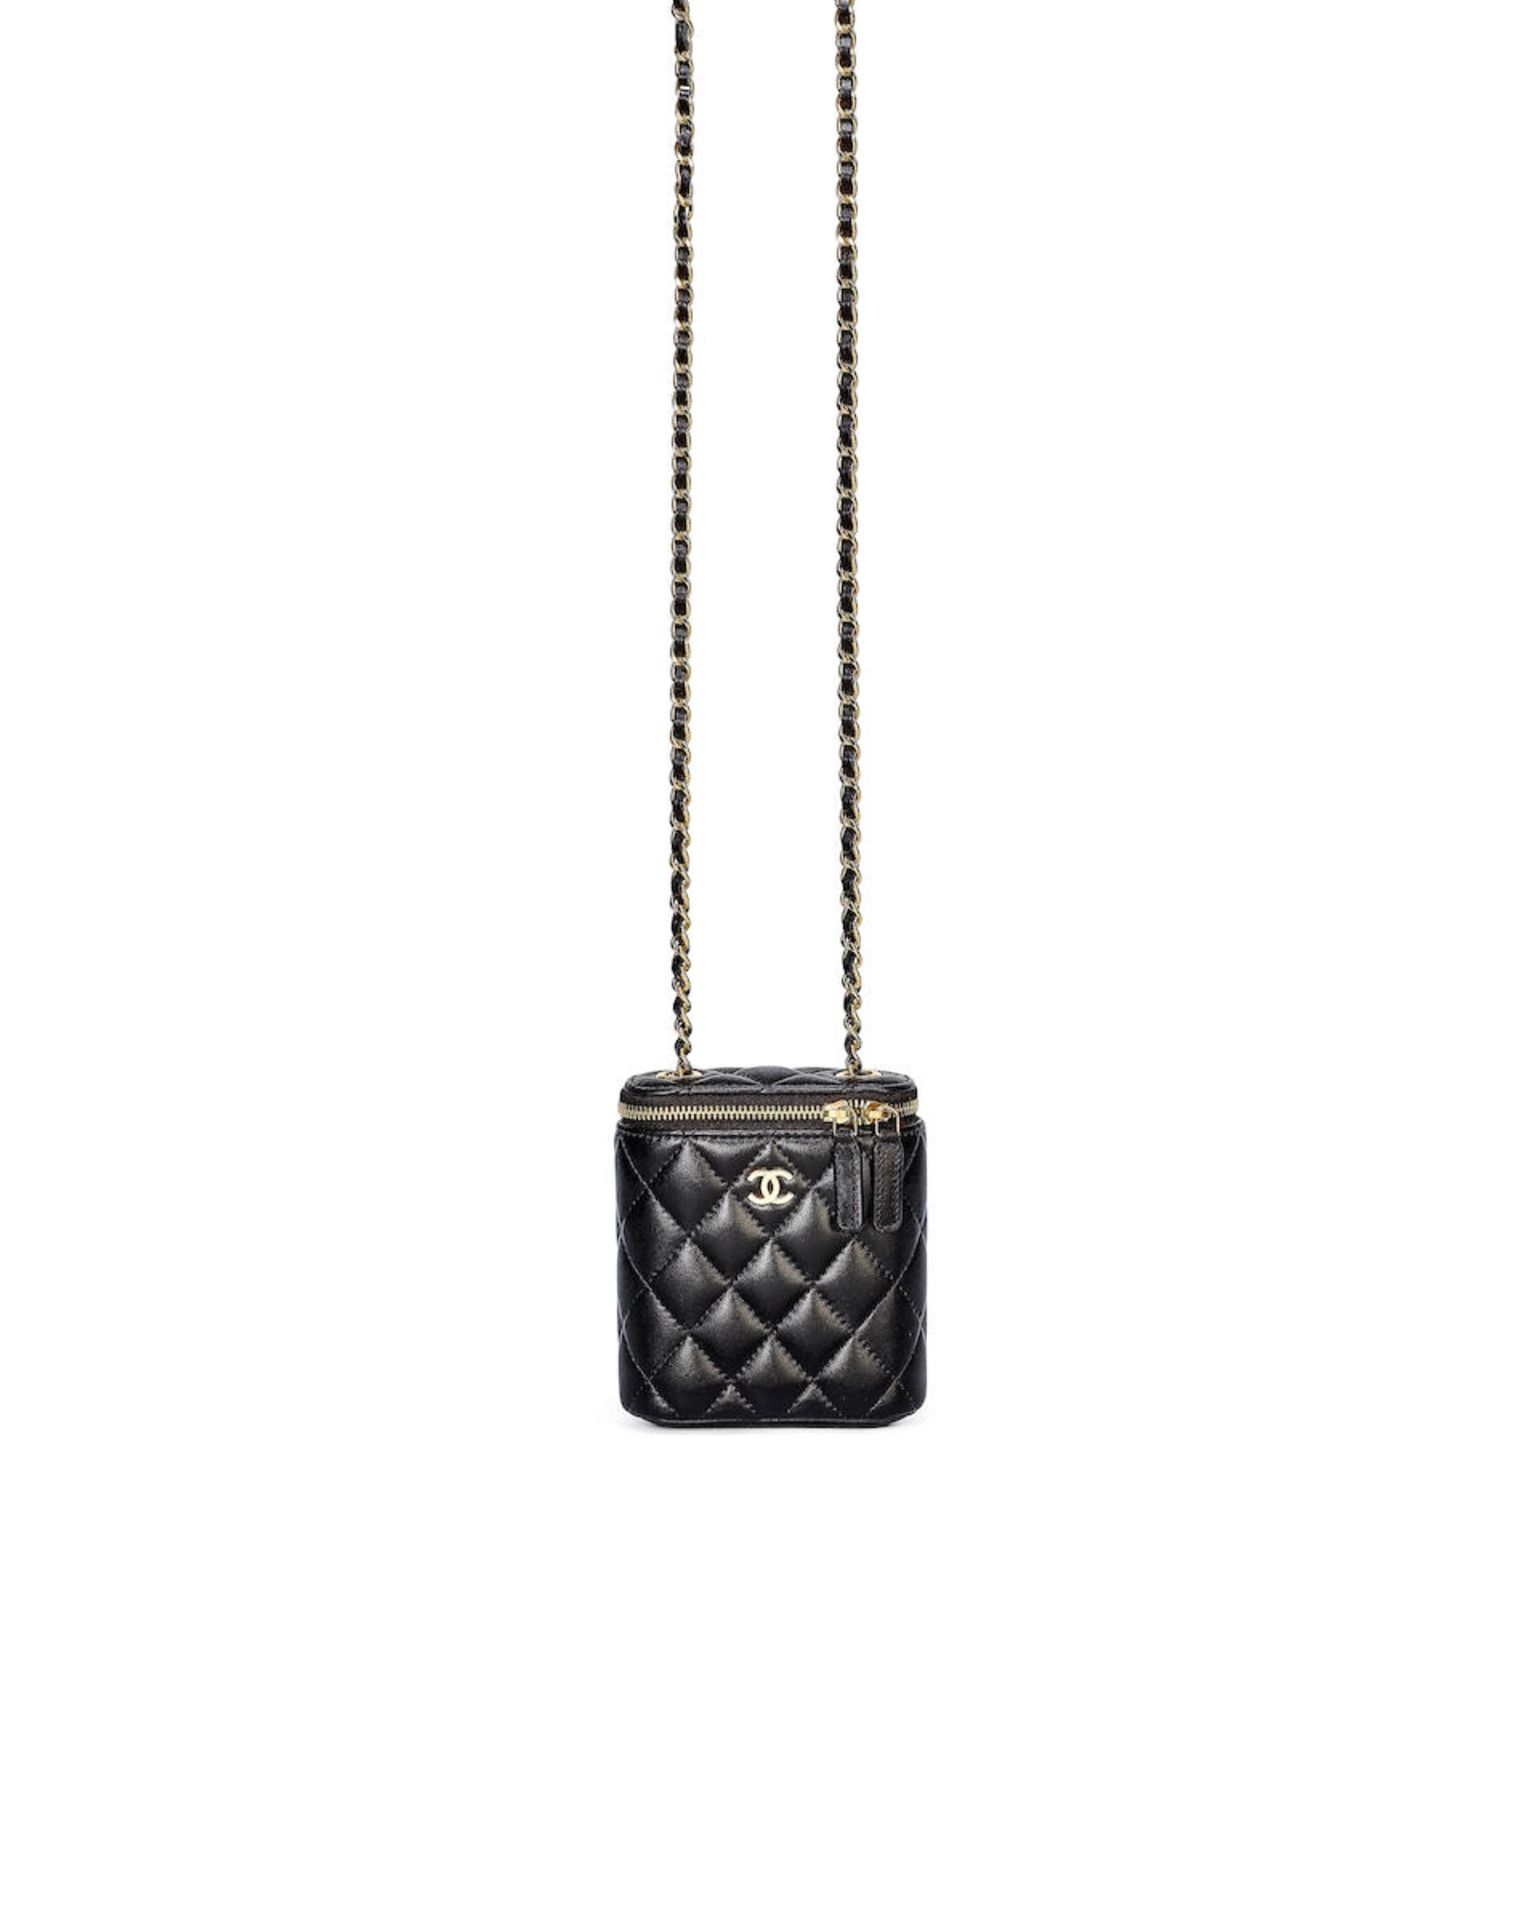 CHANEL: BLACK MATELASSÉ LAMBSKIN QUILTED VANITY CASE WITH GOLD TONED CHAIN (Includes origin...